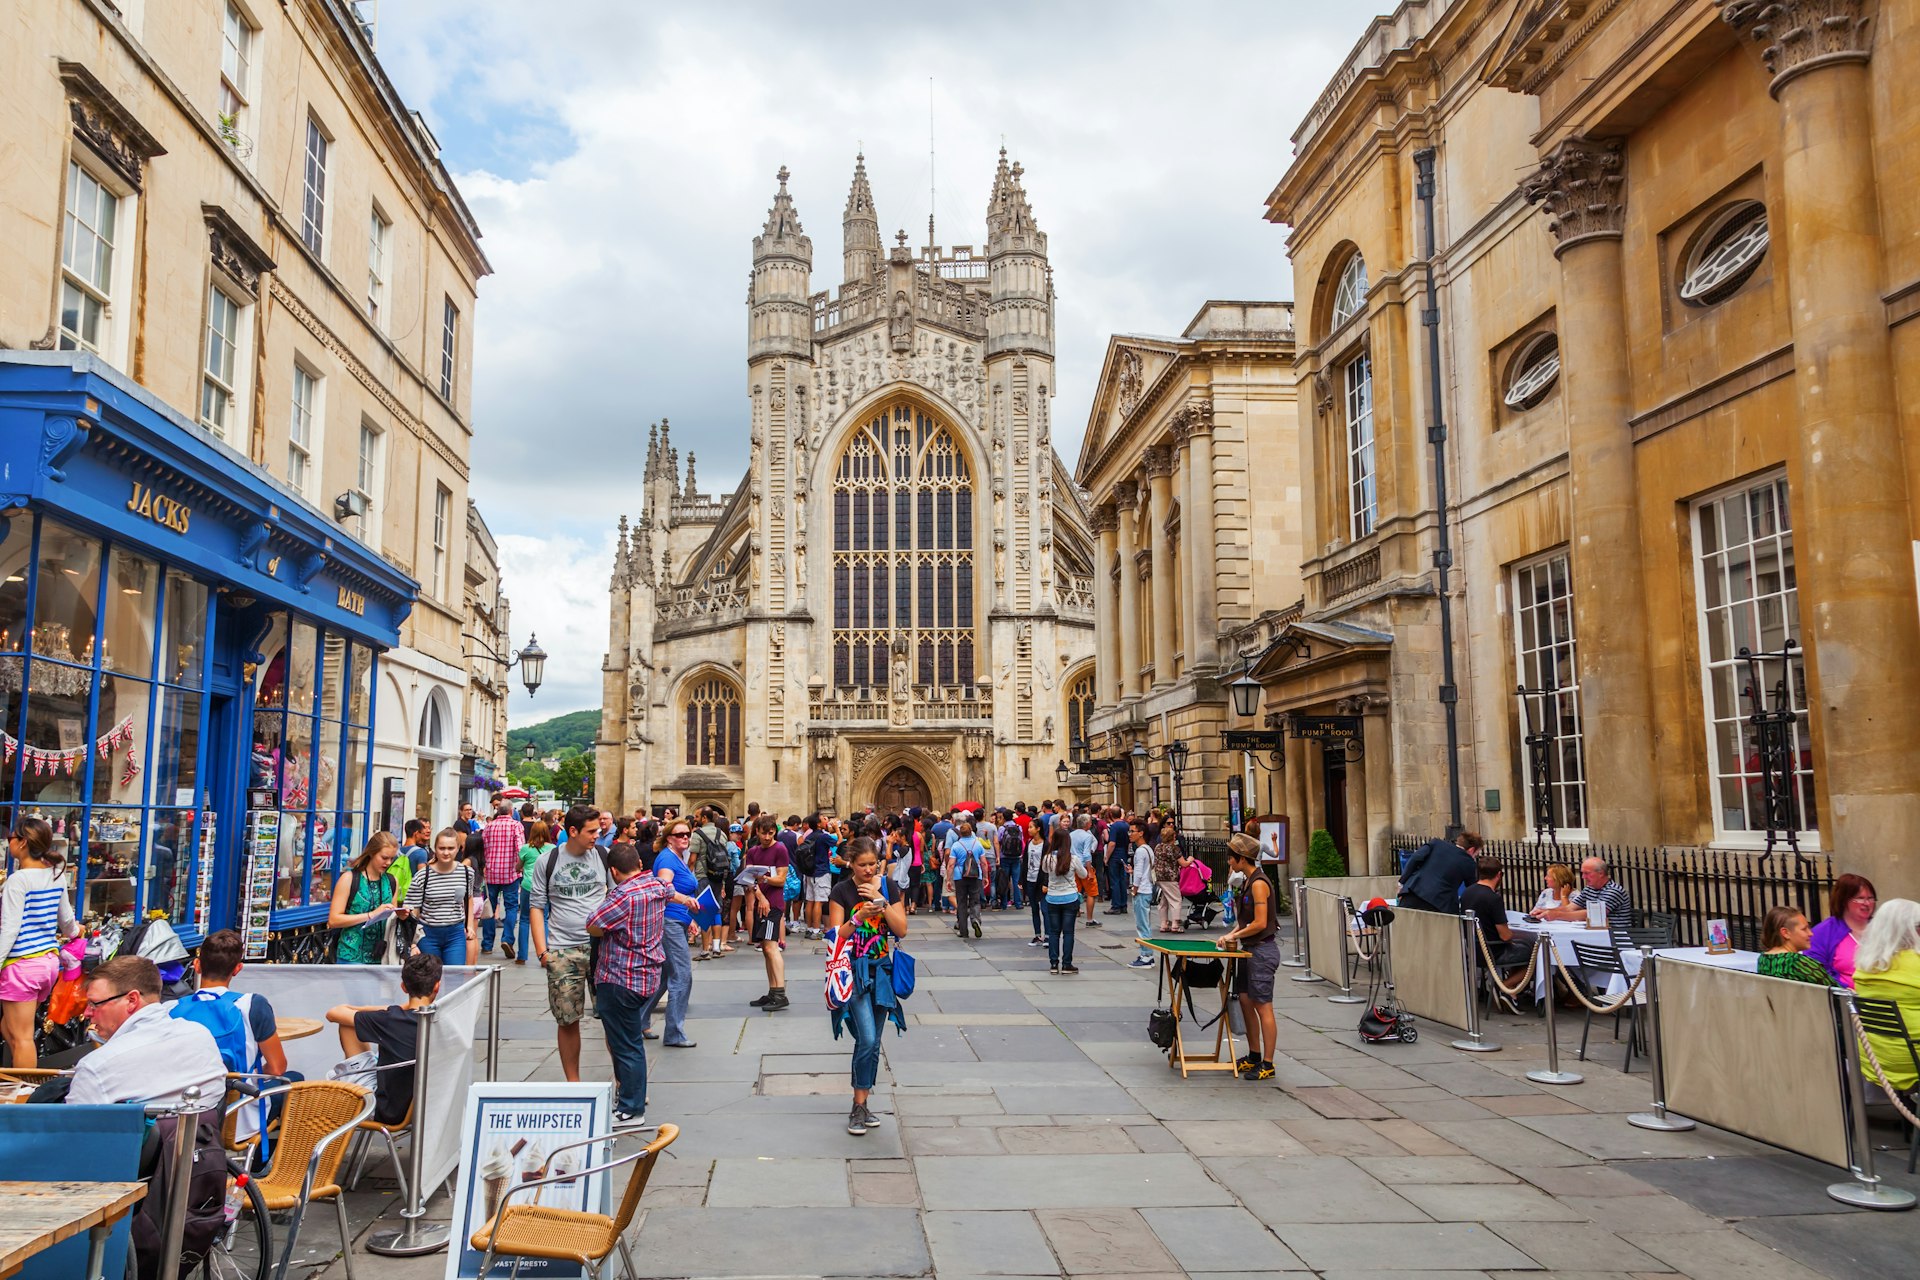 People walk in the street in front of the Bath Abbey, a towering church with a huge arched pane of stained glass facing the plaza.